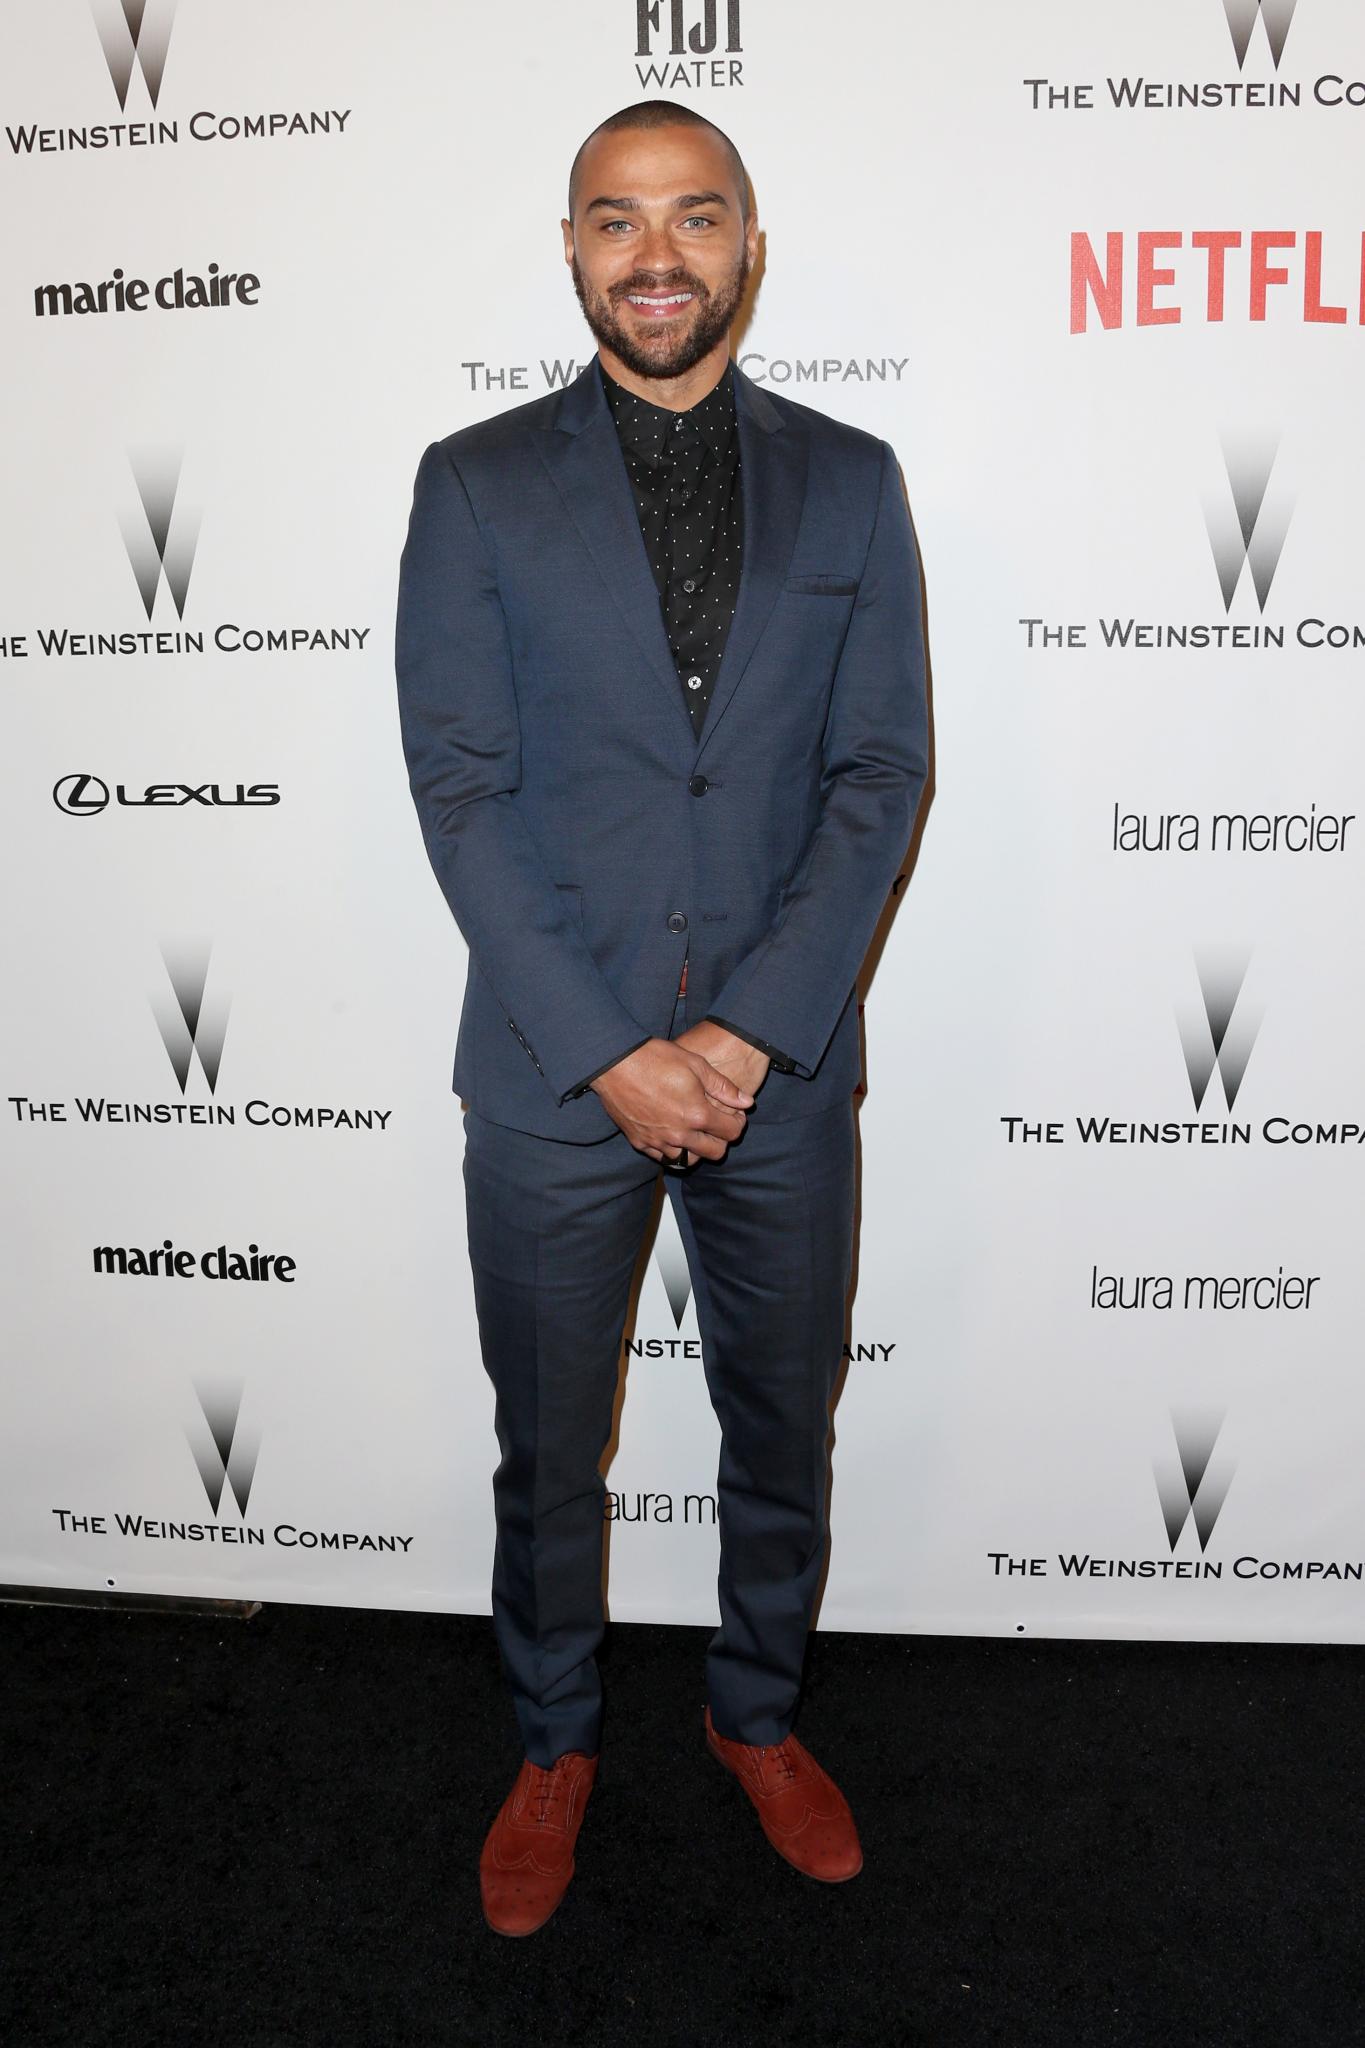 Jesse Williams On Going From Educator to Hollywood, #BlackLivesMatter
